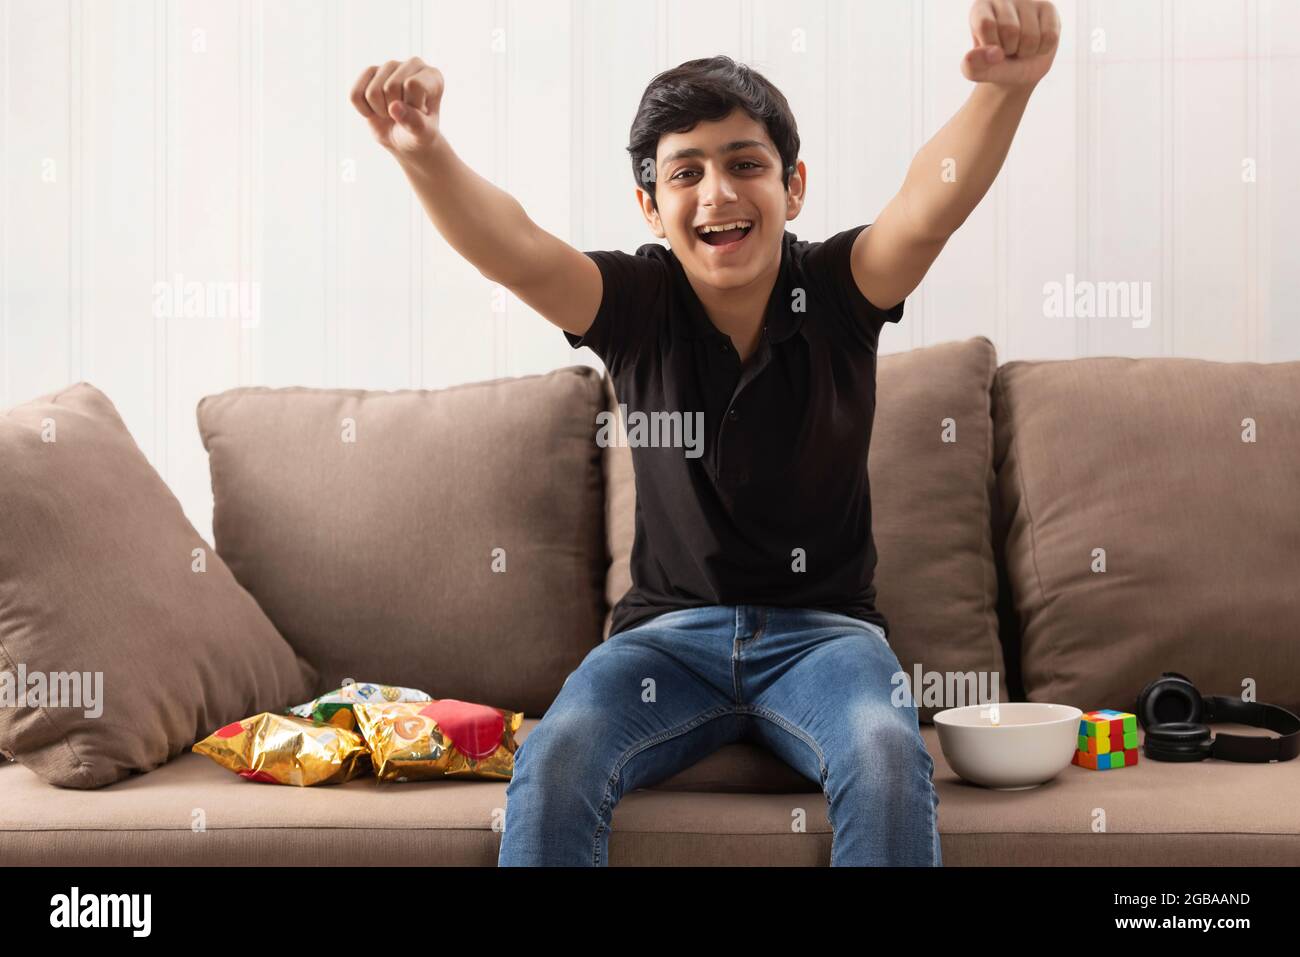 A TEENAGE BOY HAPPILY CHEERING WHILE SITTING IN FRONT OF CAMERA Stock Photo